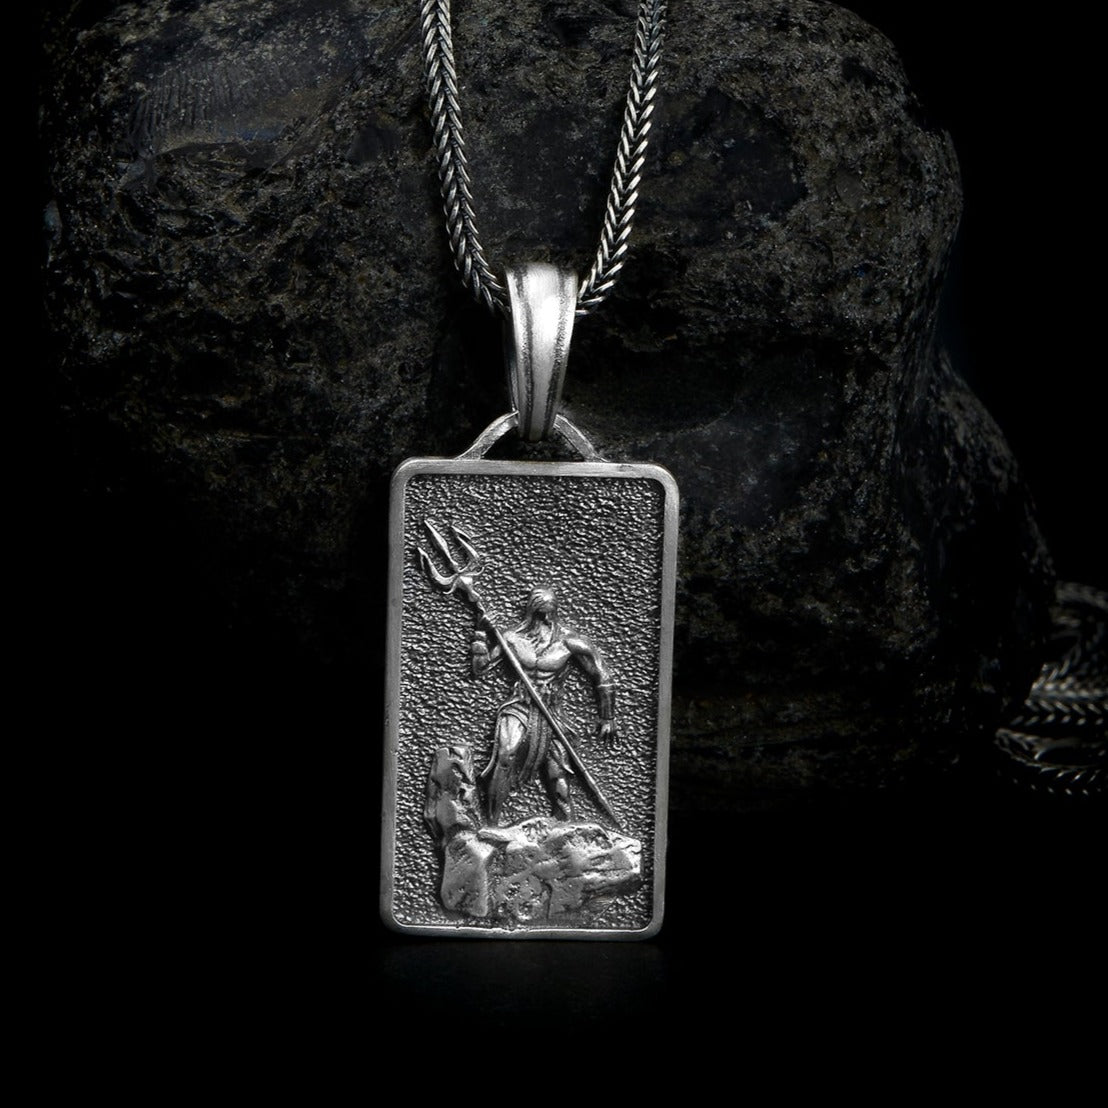 handmade sterling silver necklace featuring a detailed pendant of Poseidon, the Greek god of the sea, holding his iconic trident